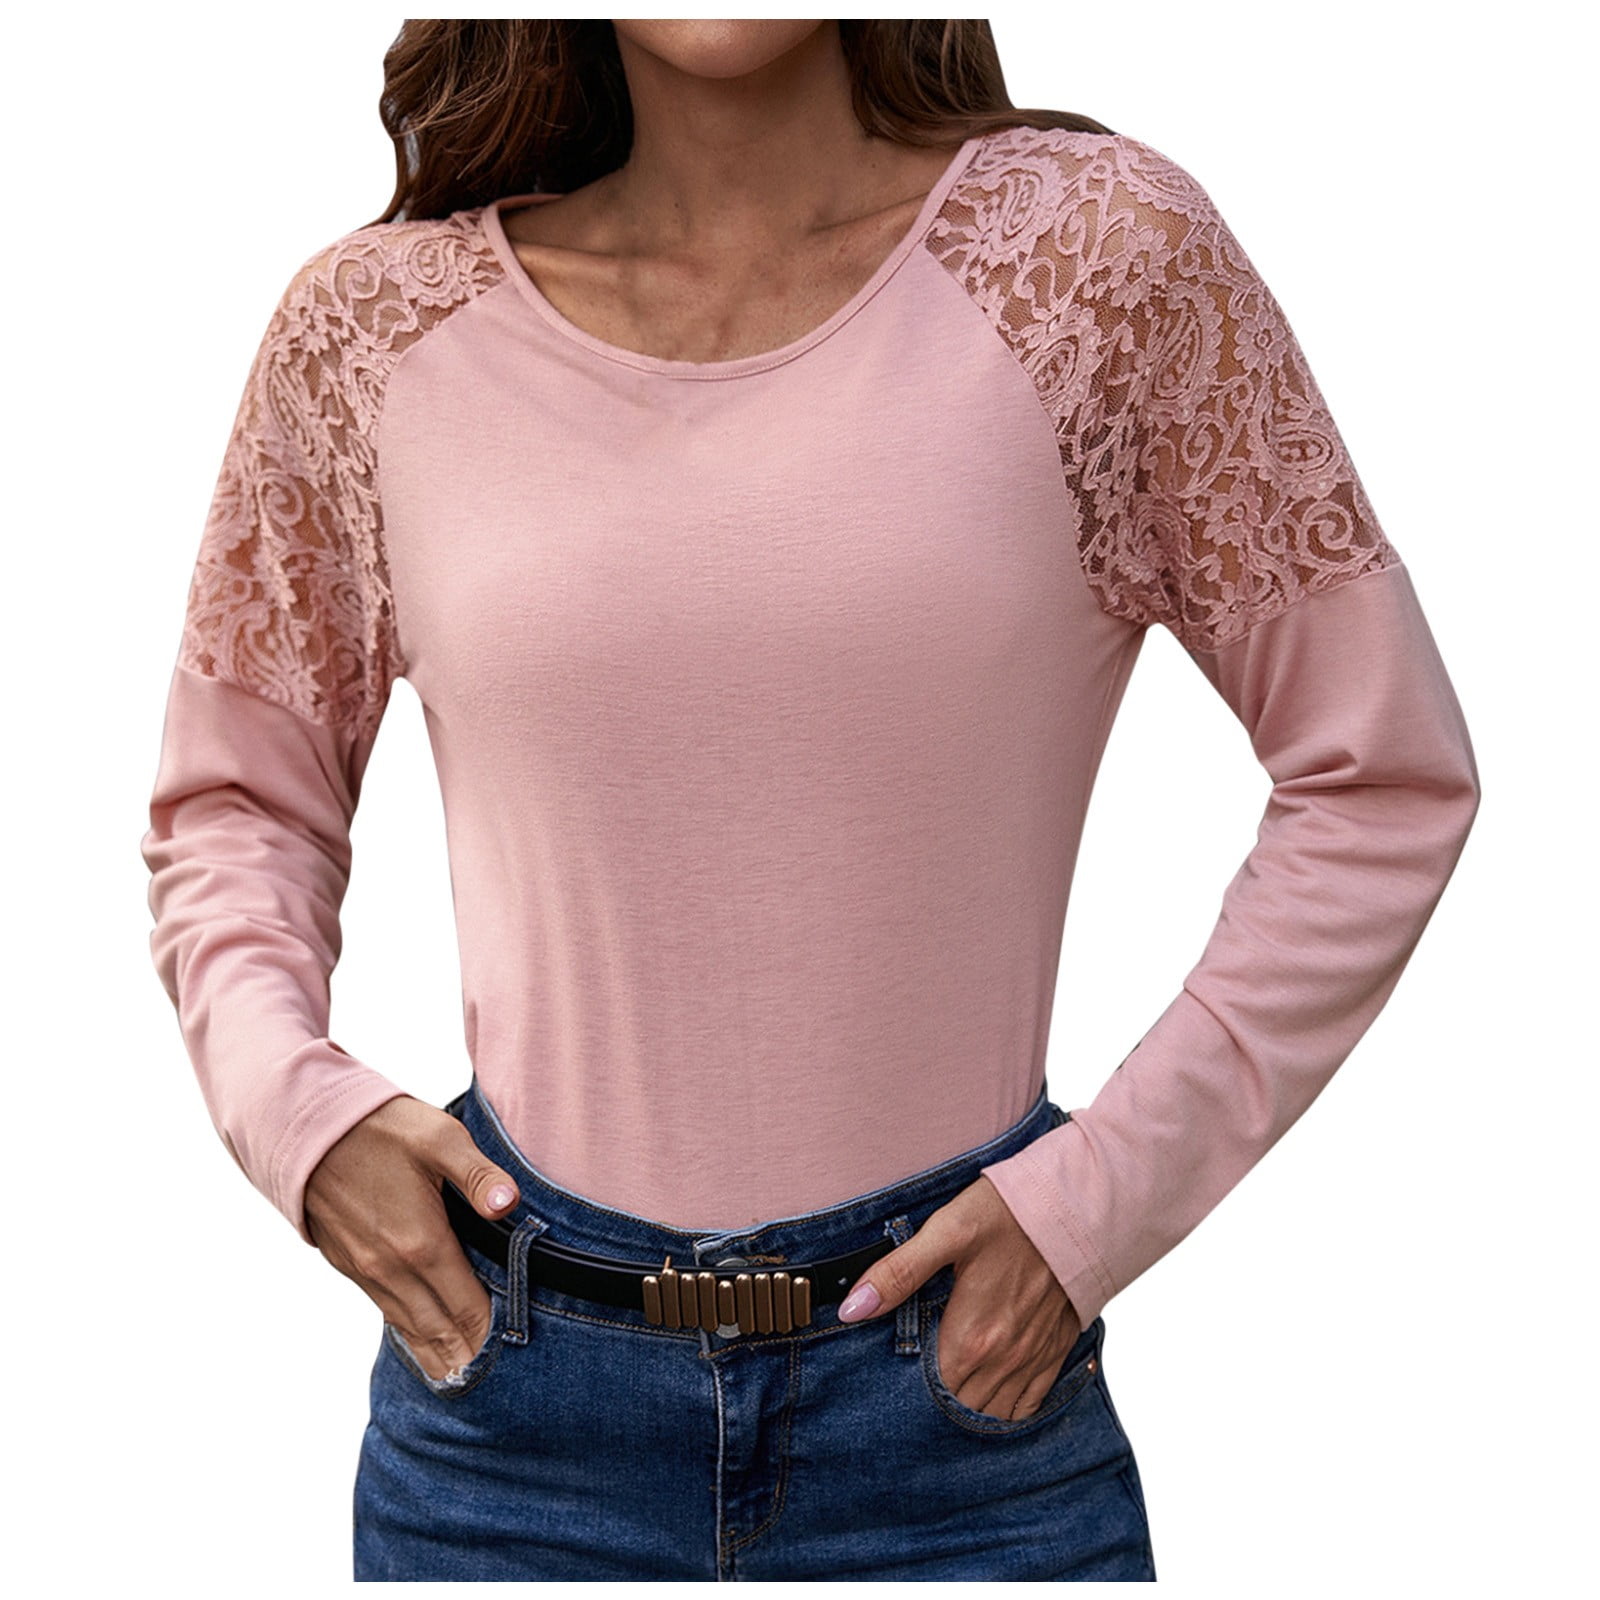  uhnmki Womens Plus Size Tops Fall Season Sexy Lace Slim Hollow  Out Floral Pattern Blouse Womens Long Sleeve Tee Shirt Beige : Clothing,  Shoes & Jewelry